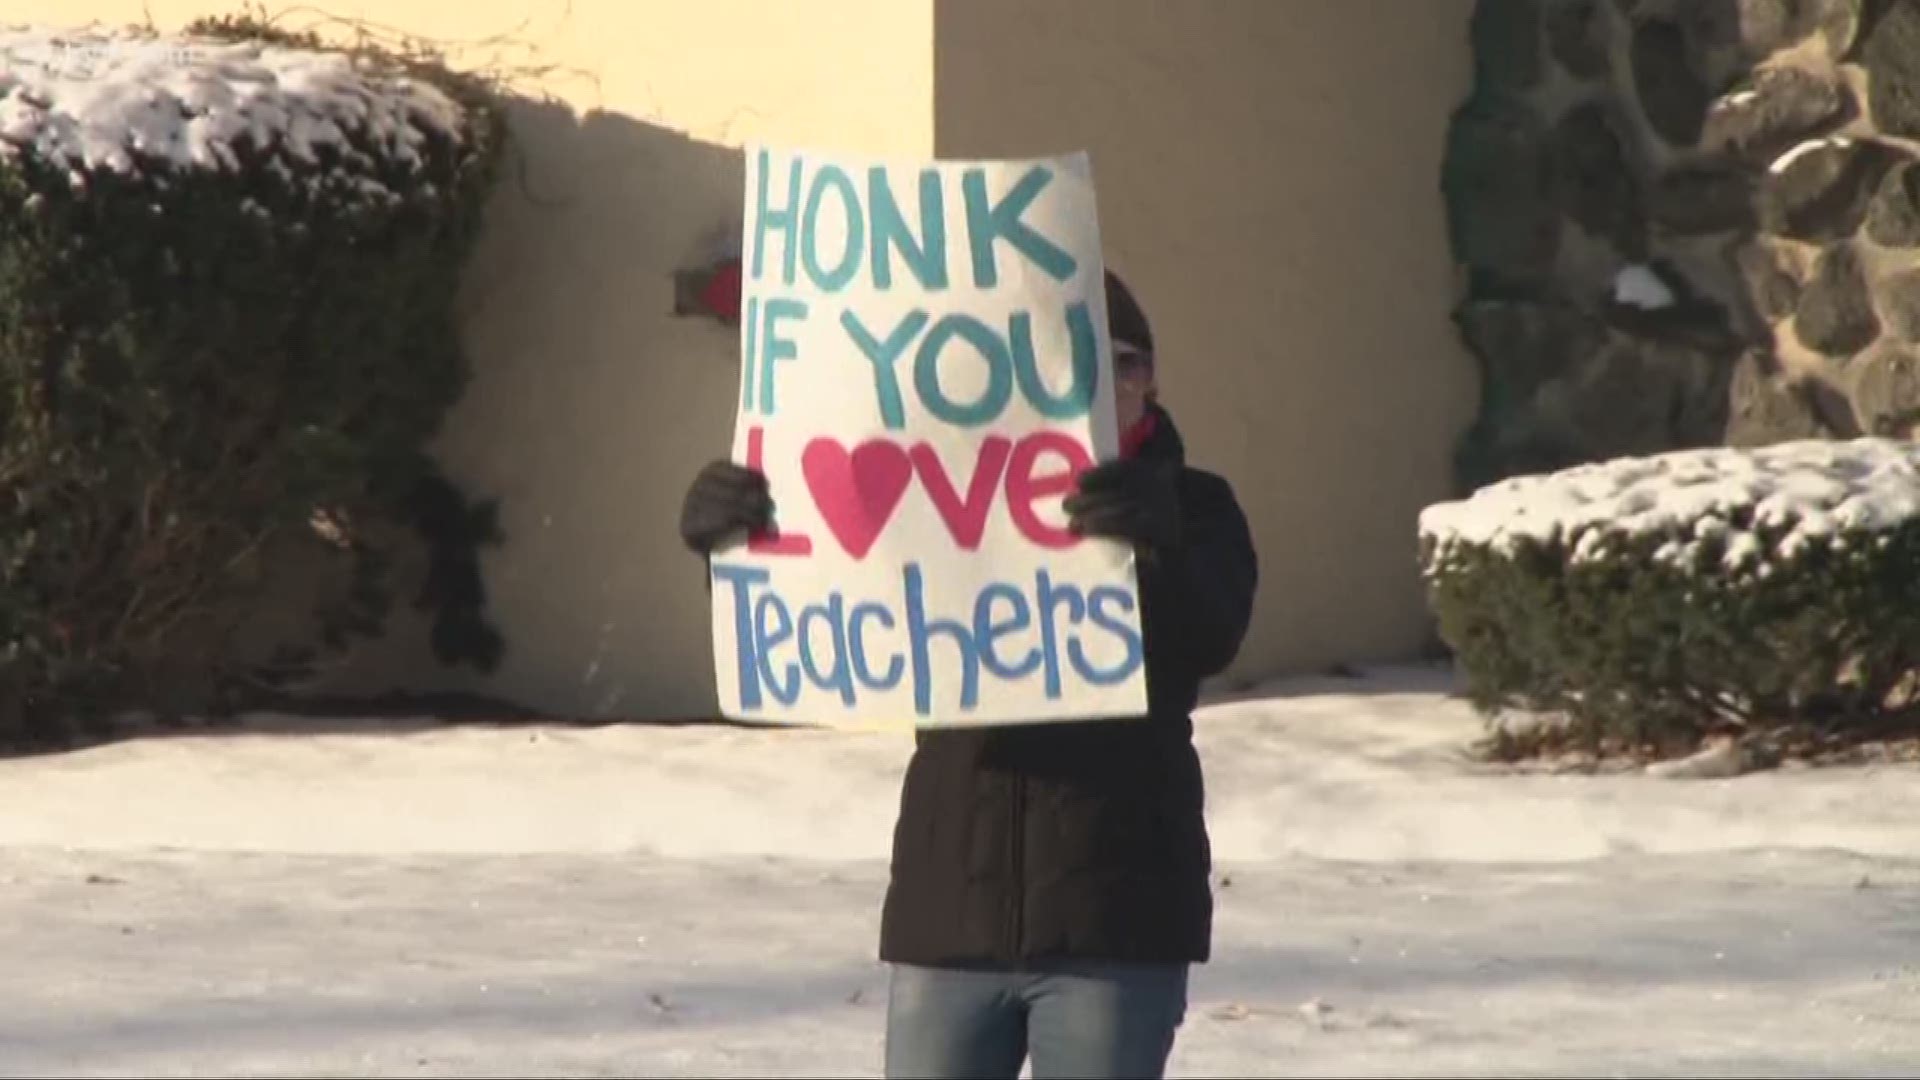 Feb. 19, 2019: A group of teachers with Summit Academy Parma began walking the picket line outside the school on Stumph Road today.